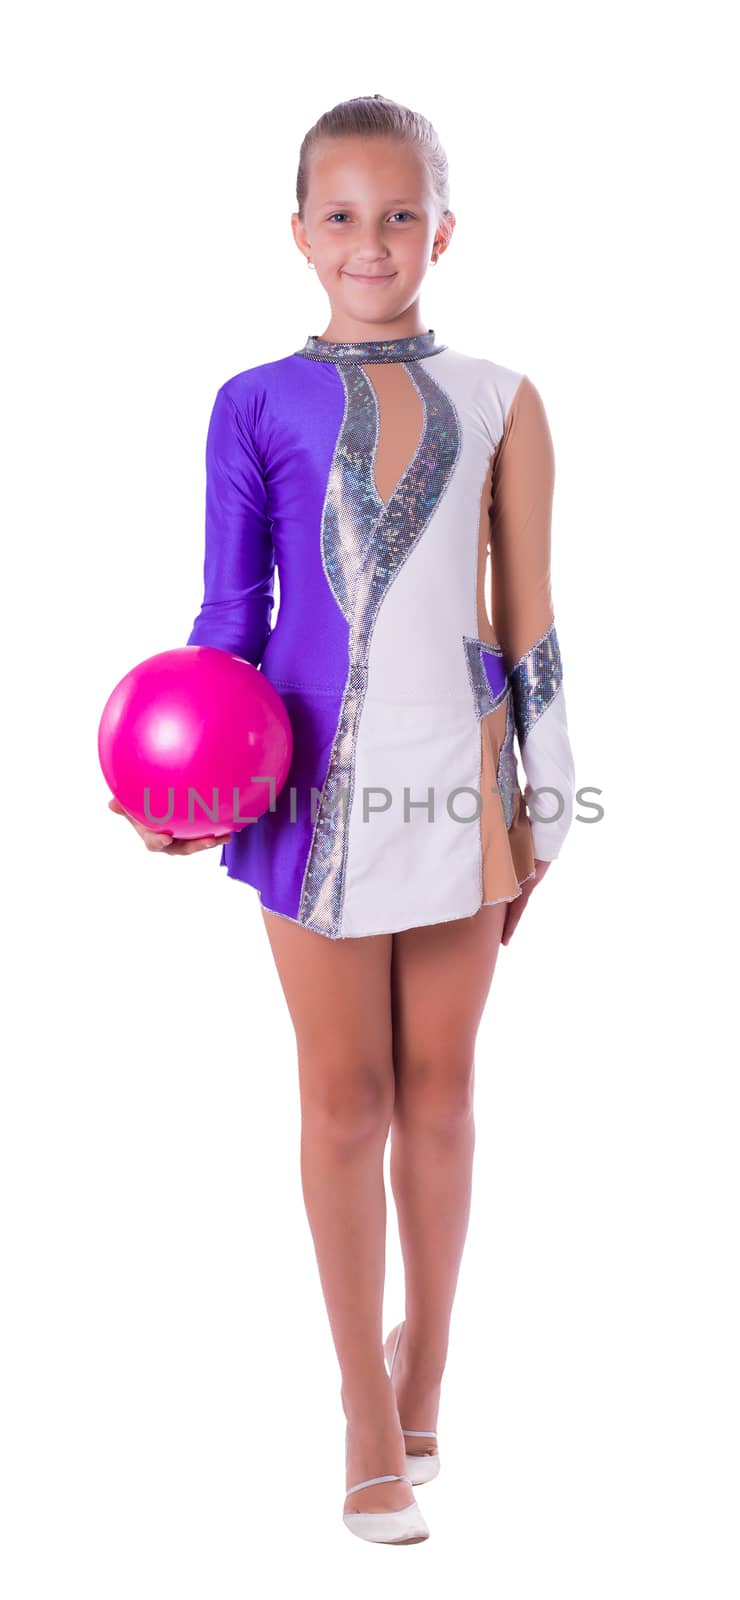 girl gymnast standing with ball  by MegaArt